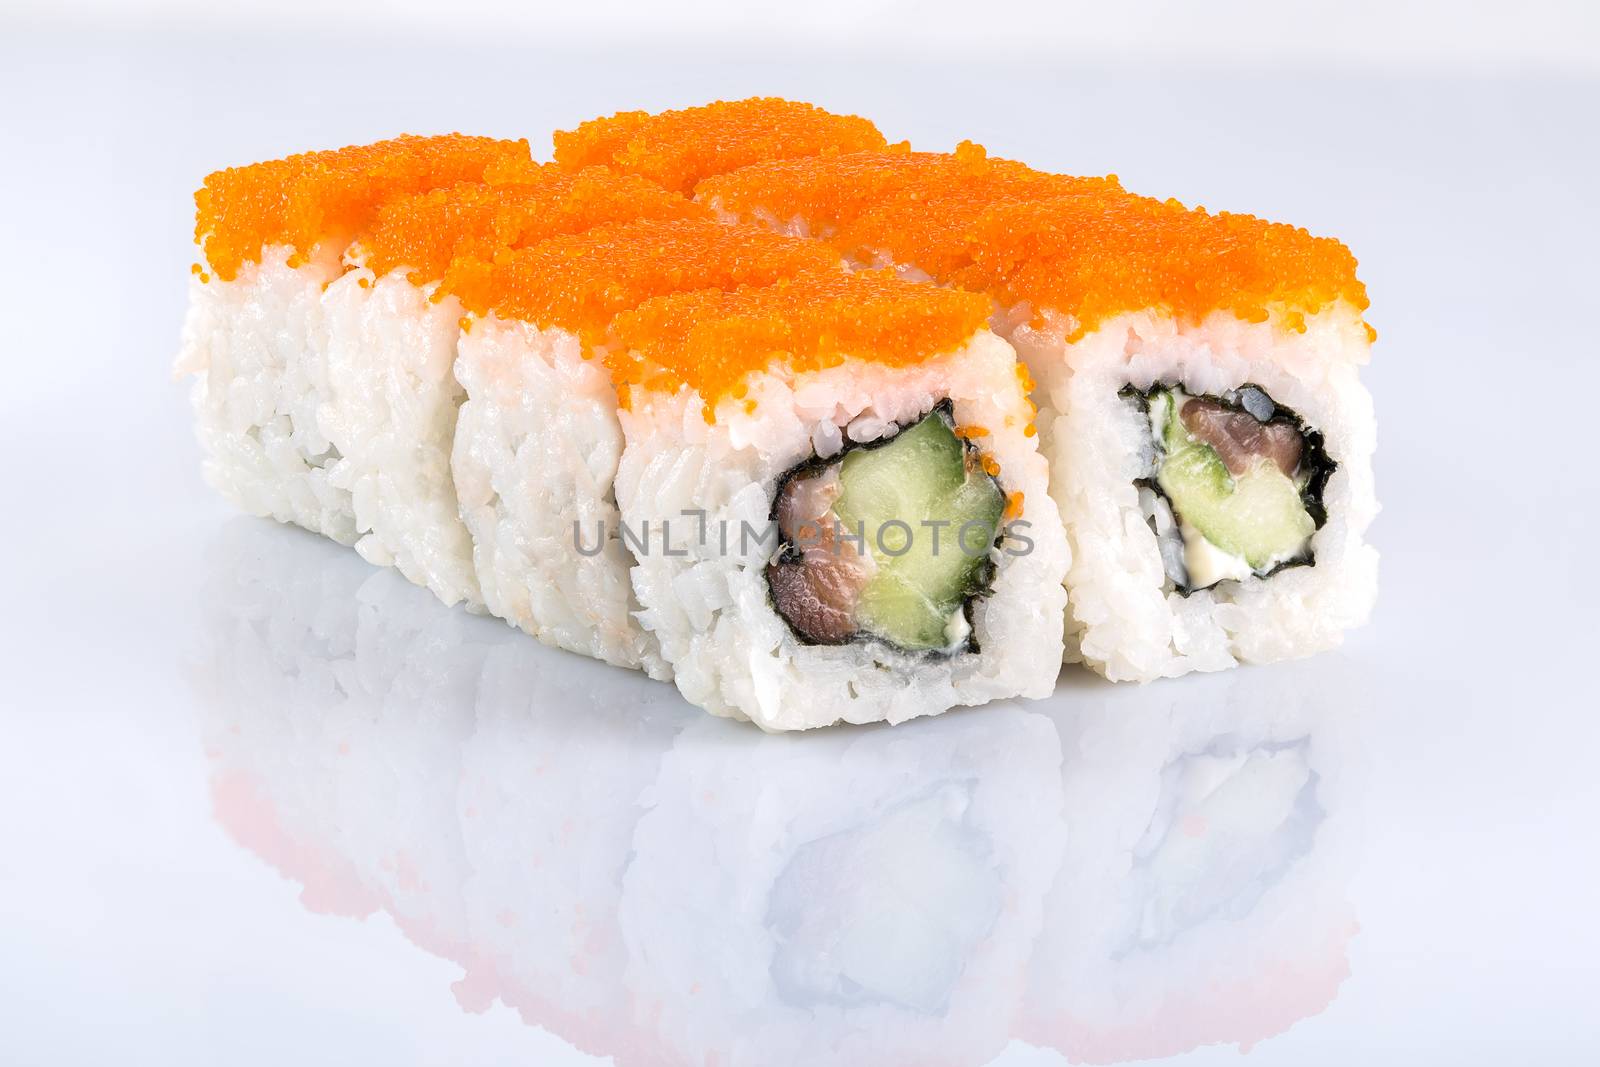 Roll the delicious sushi by baronvsp